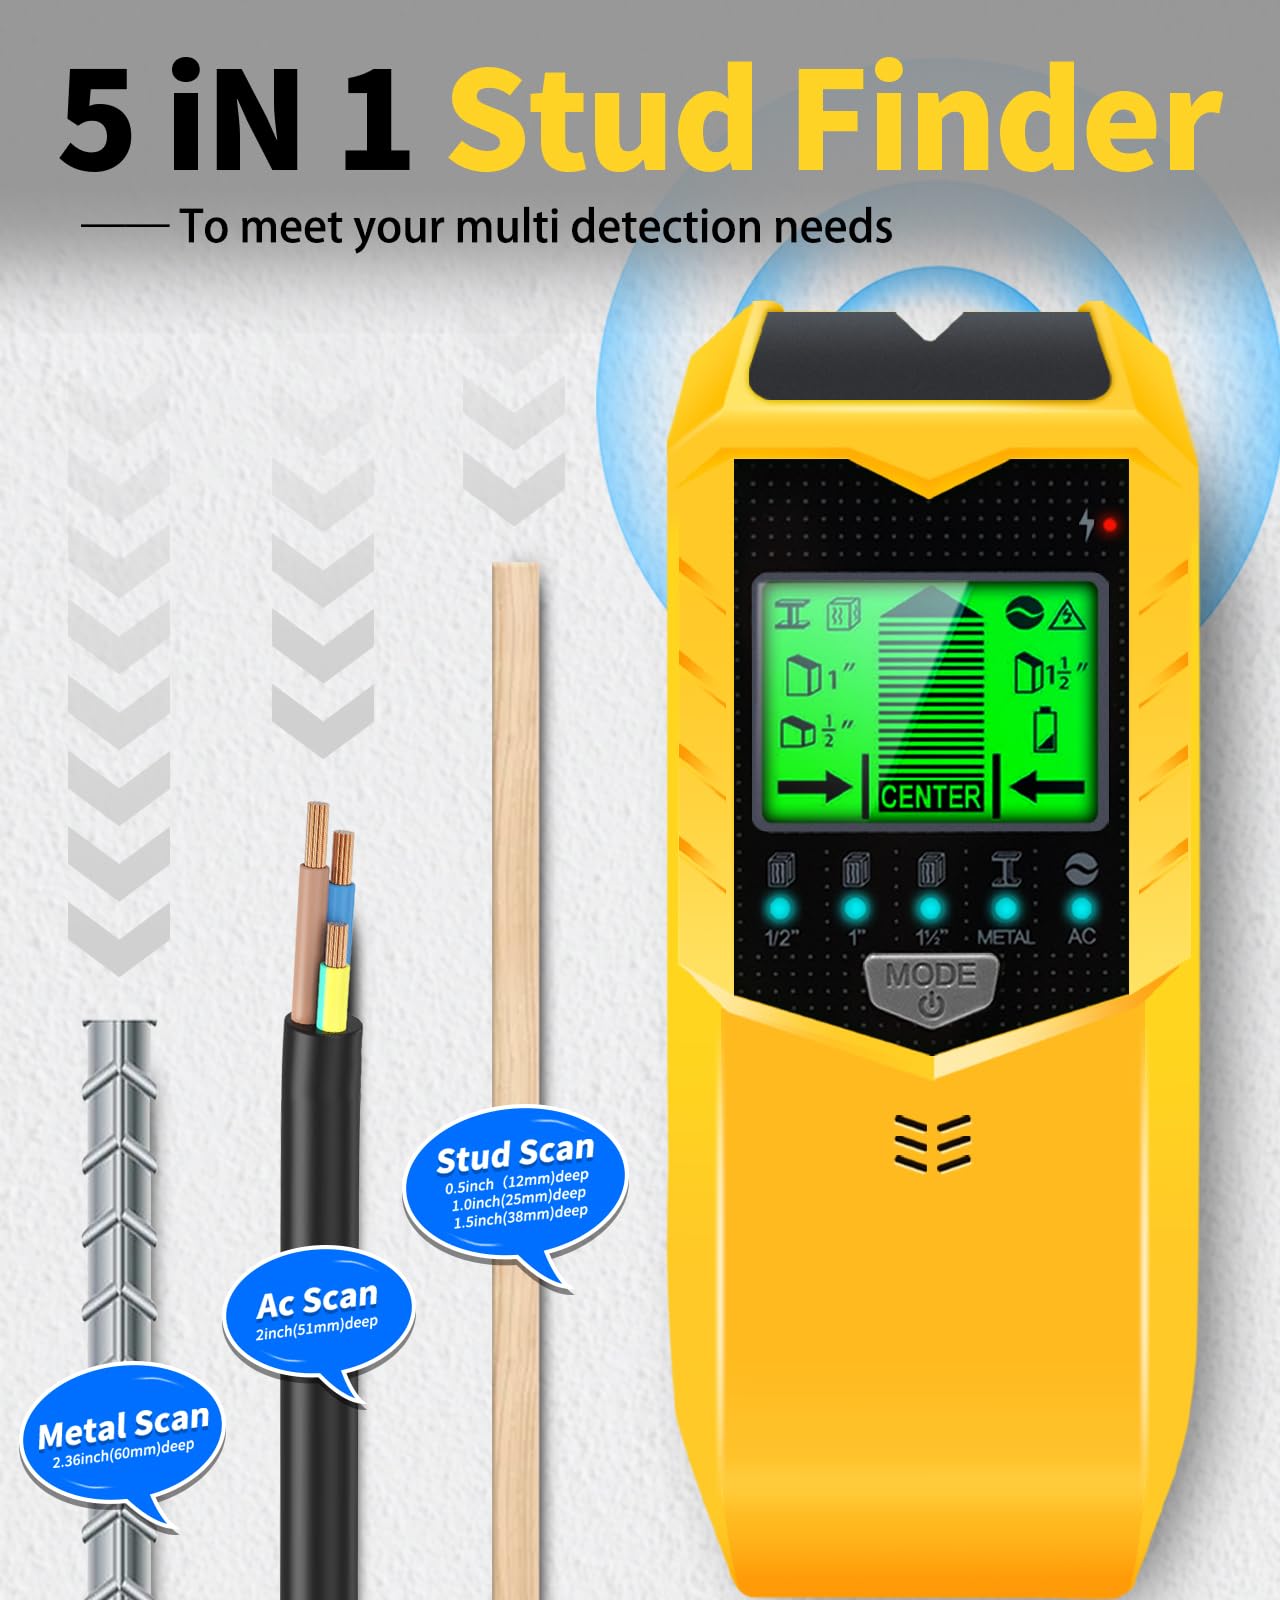 Stud Finder Wall Scanner - Upgrade 5 in 1 Electronic Stud Detector Wall Wood Metal Stud Sensor Pipe Joist Beam Finders Edge Center Finder with LCD